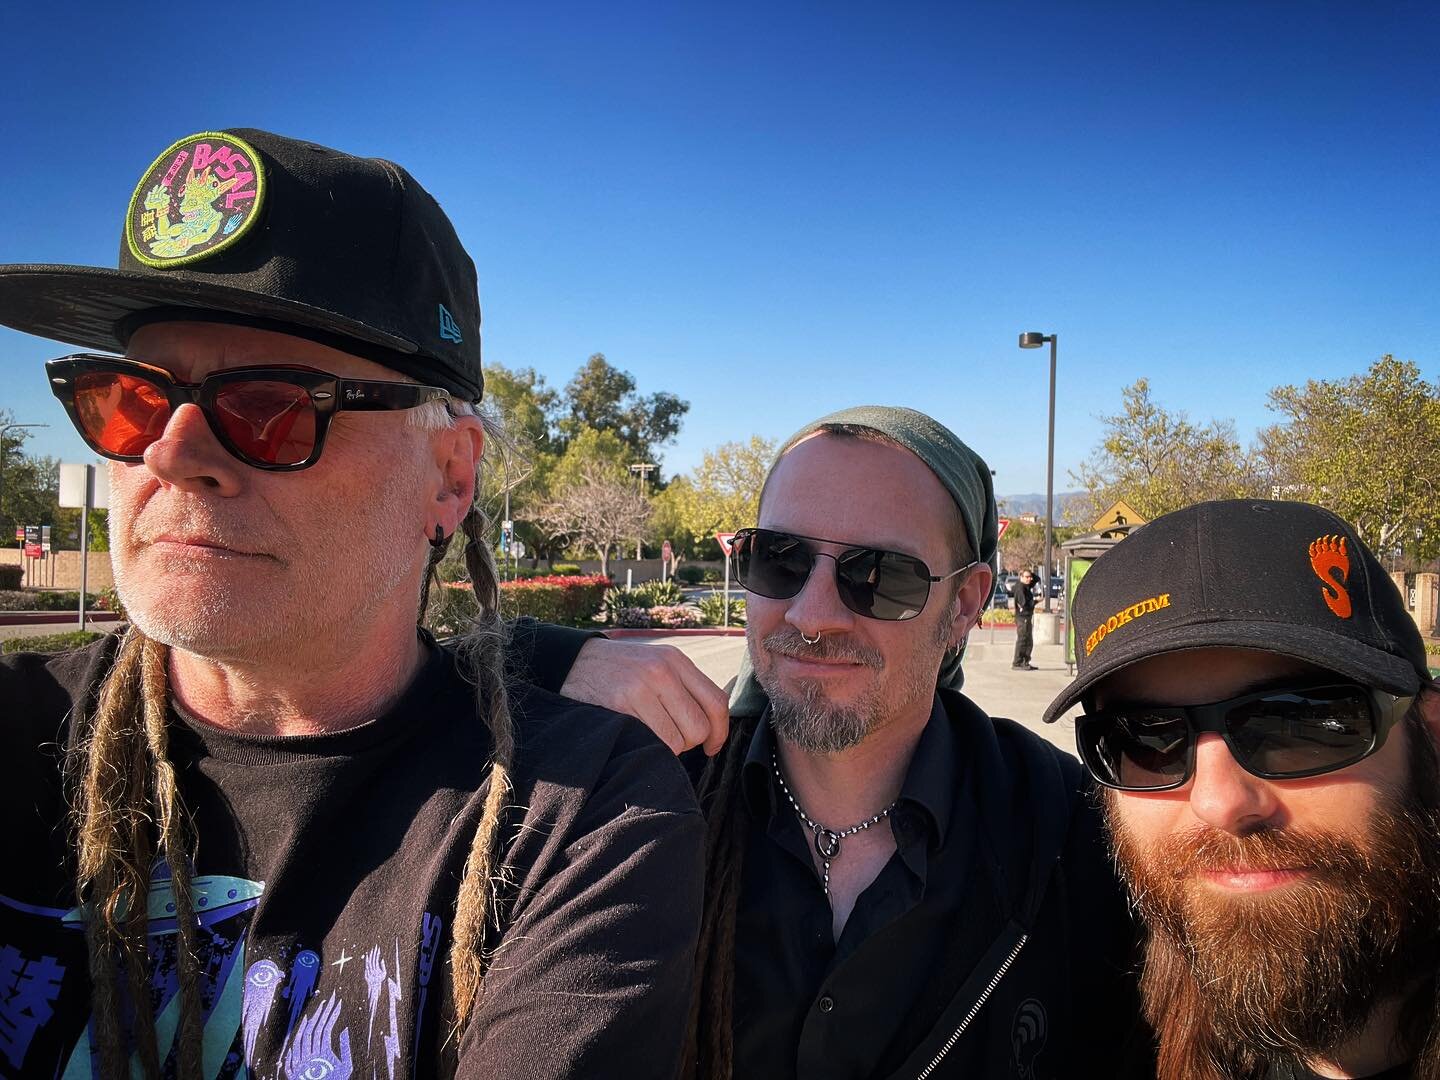 Classic lunch date with Justin Bennett and Toby Tackett! Sure miss these guys.  Thrill kill kult Friday Santa Ana !